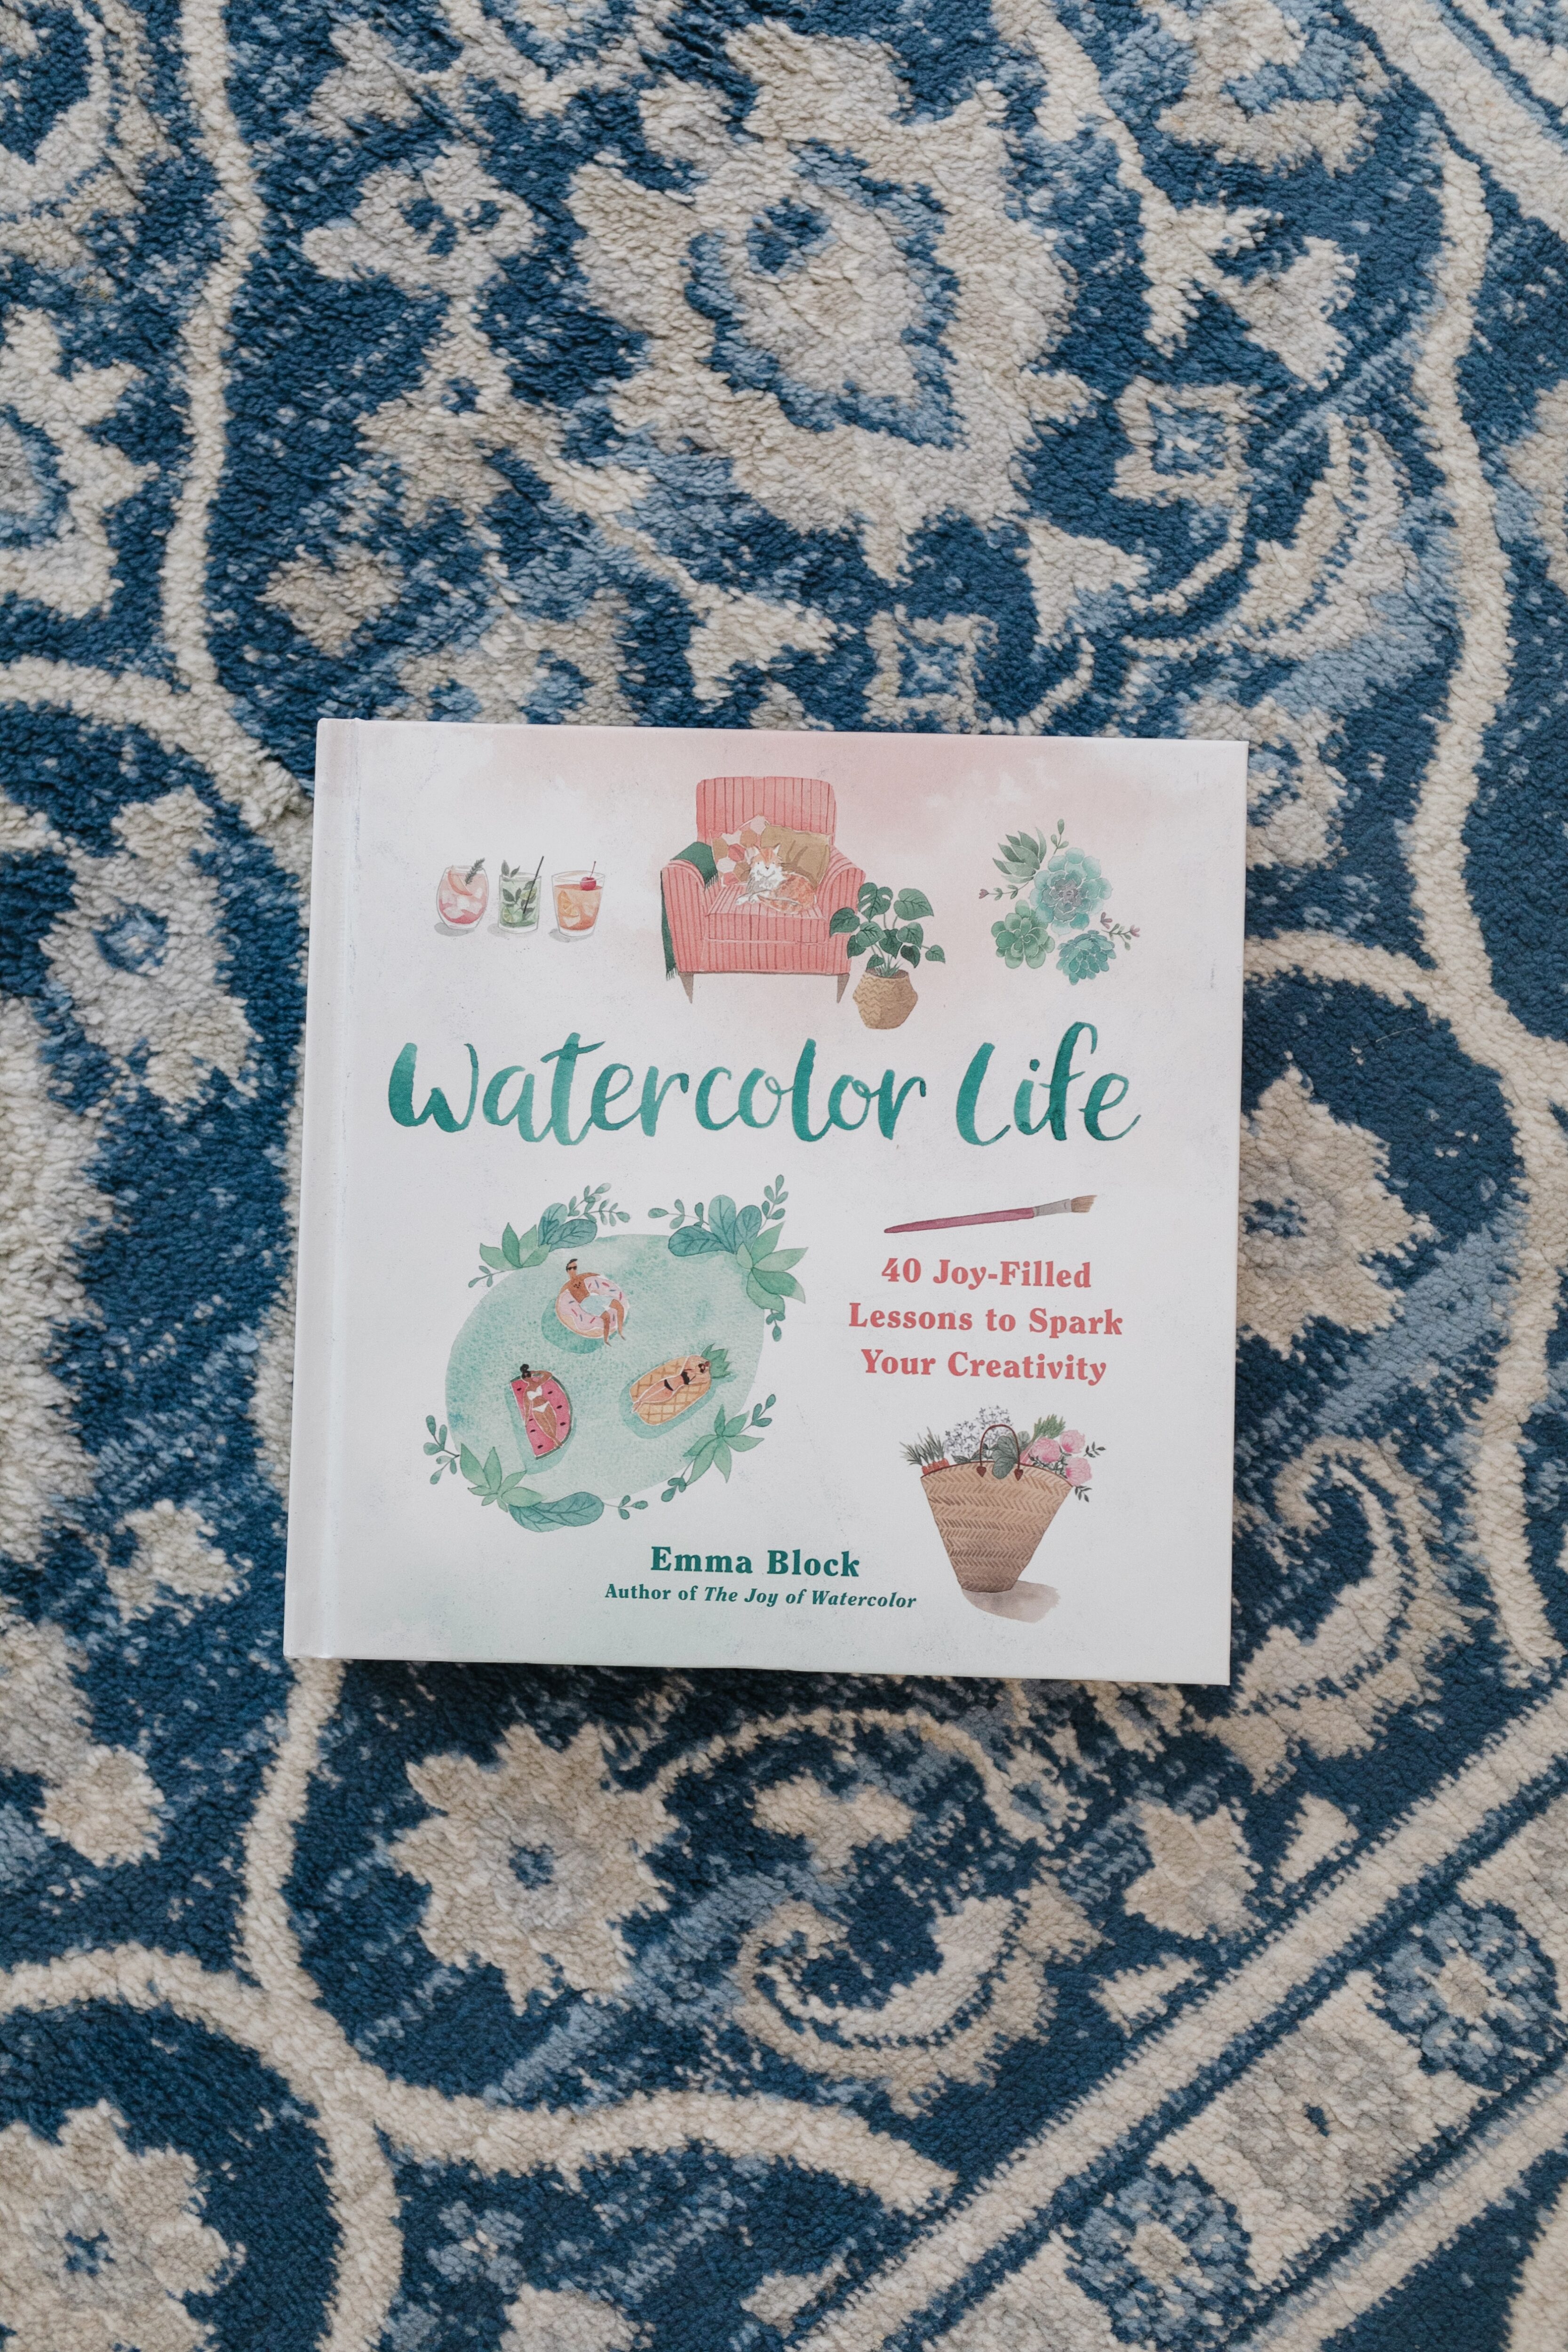 Mother's Day gift: watercolor book